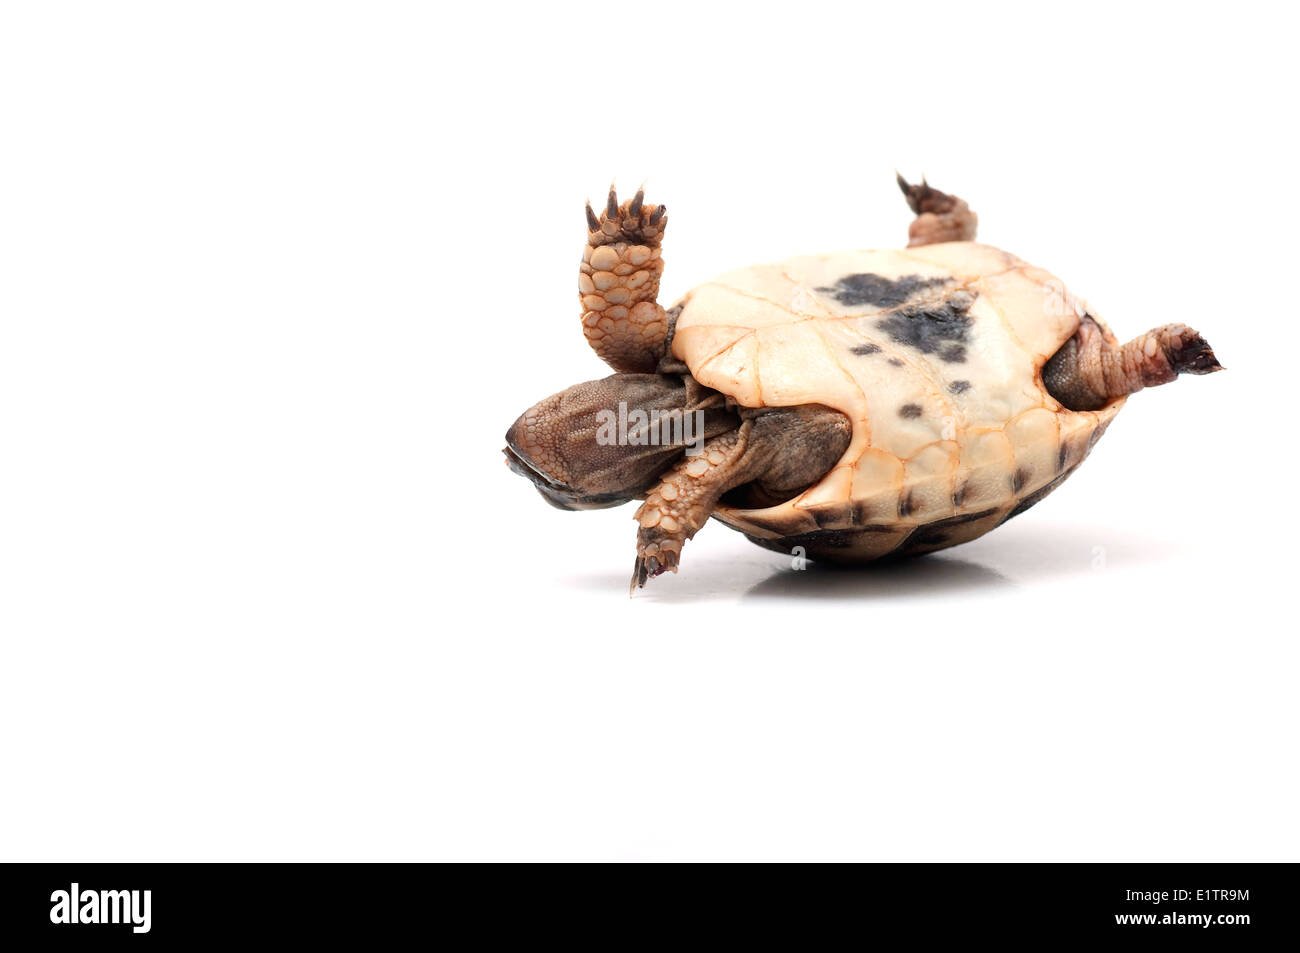 Turtle turned upside down, trying to get back. Stock Photo